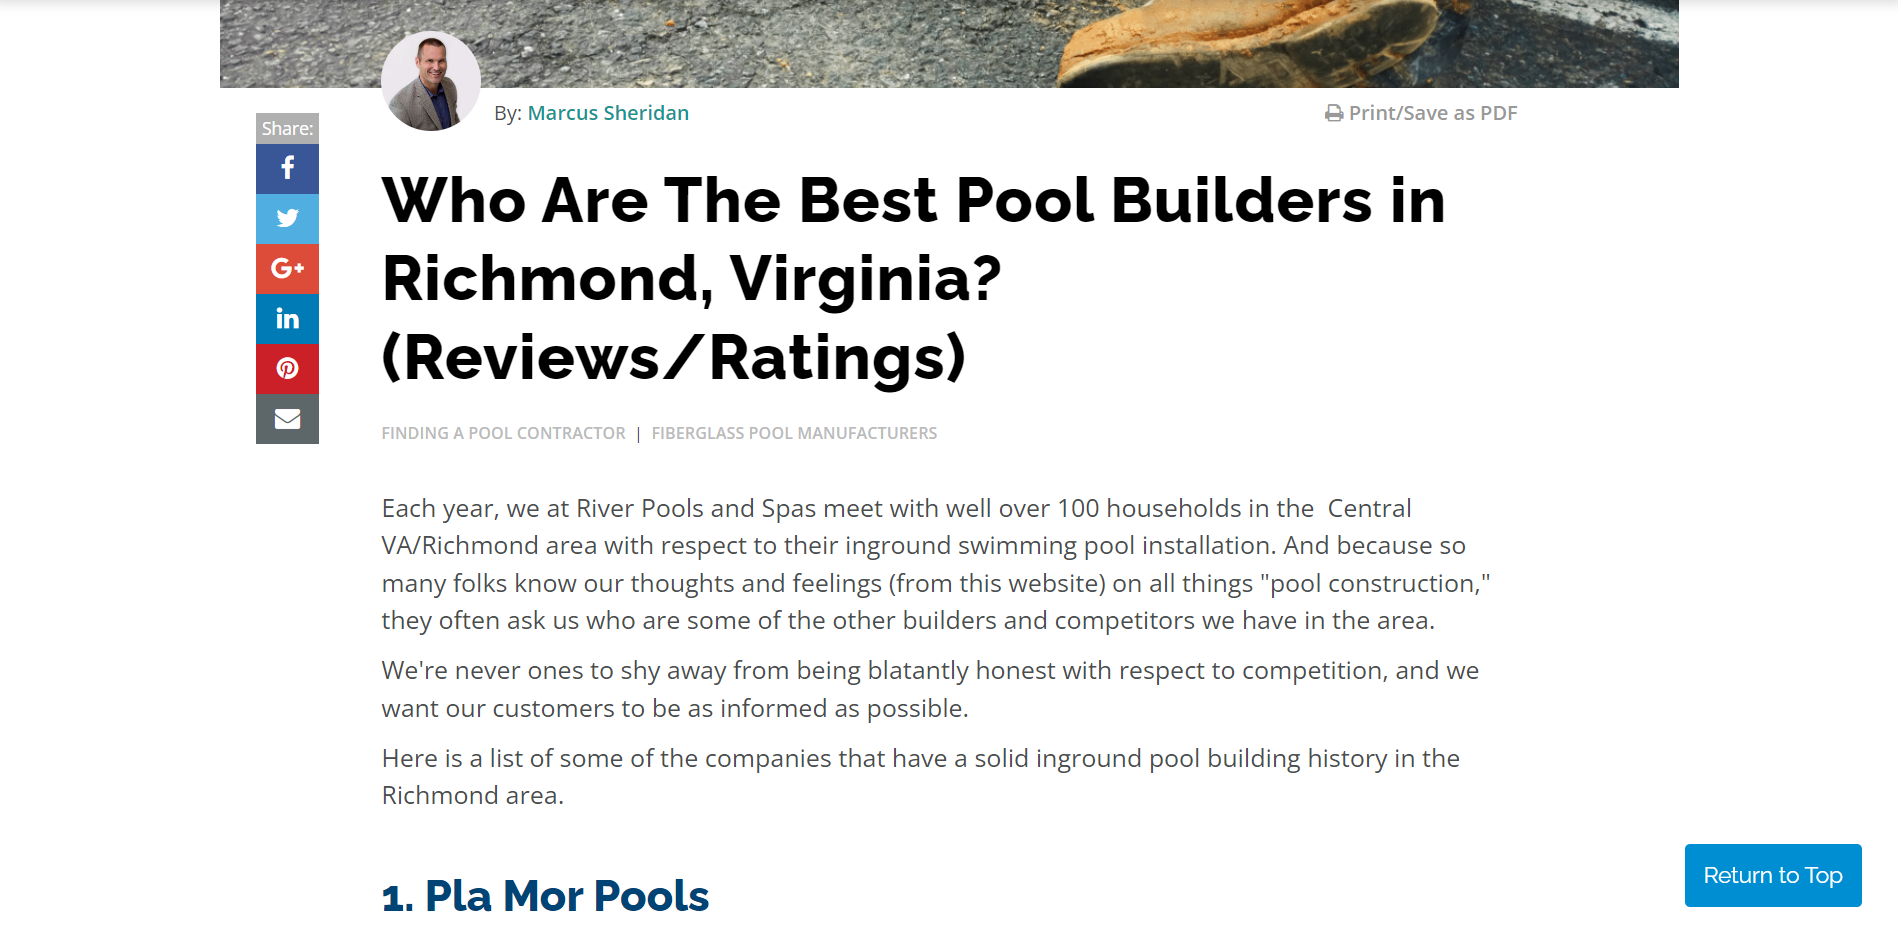 Who-Are-The-Best-Pool-Builders-in-Richmond-Virginia-Reviews-Ratings-